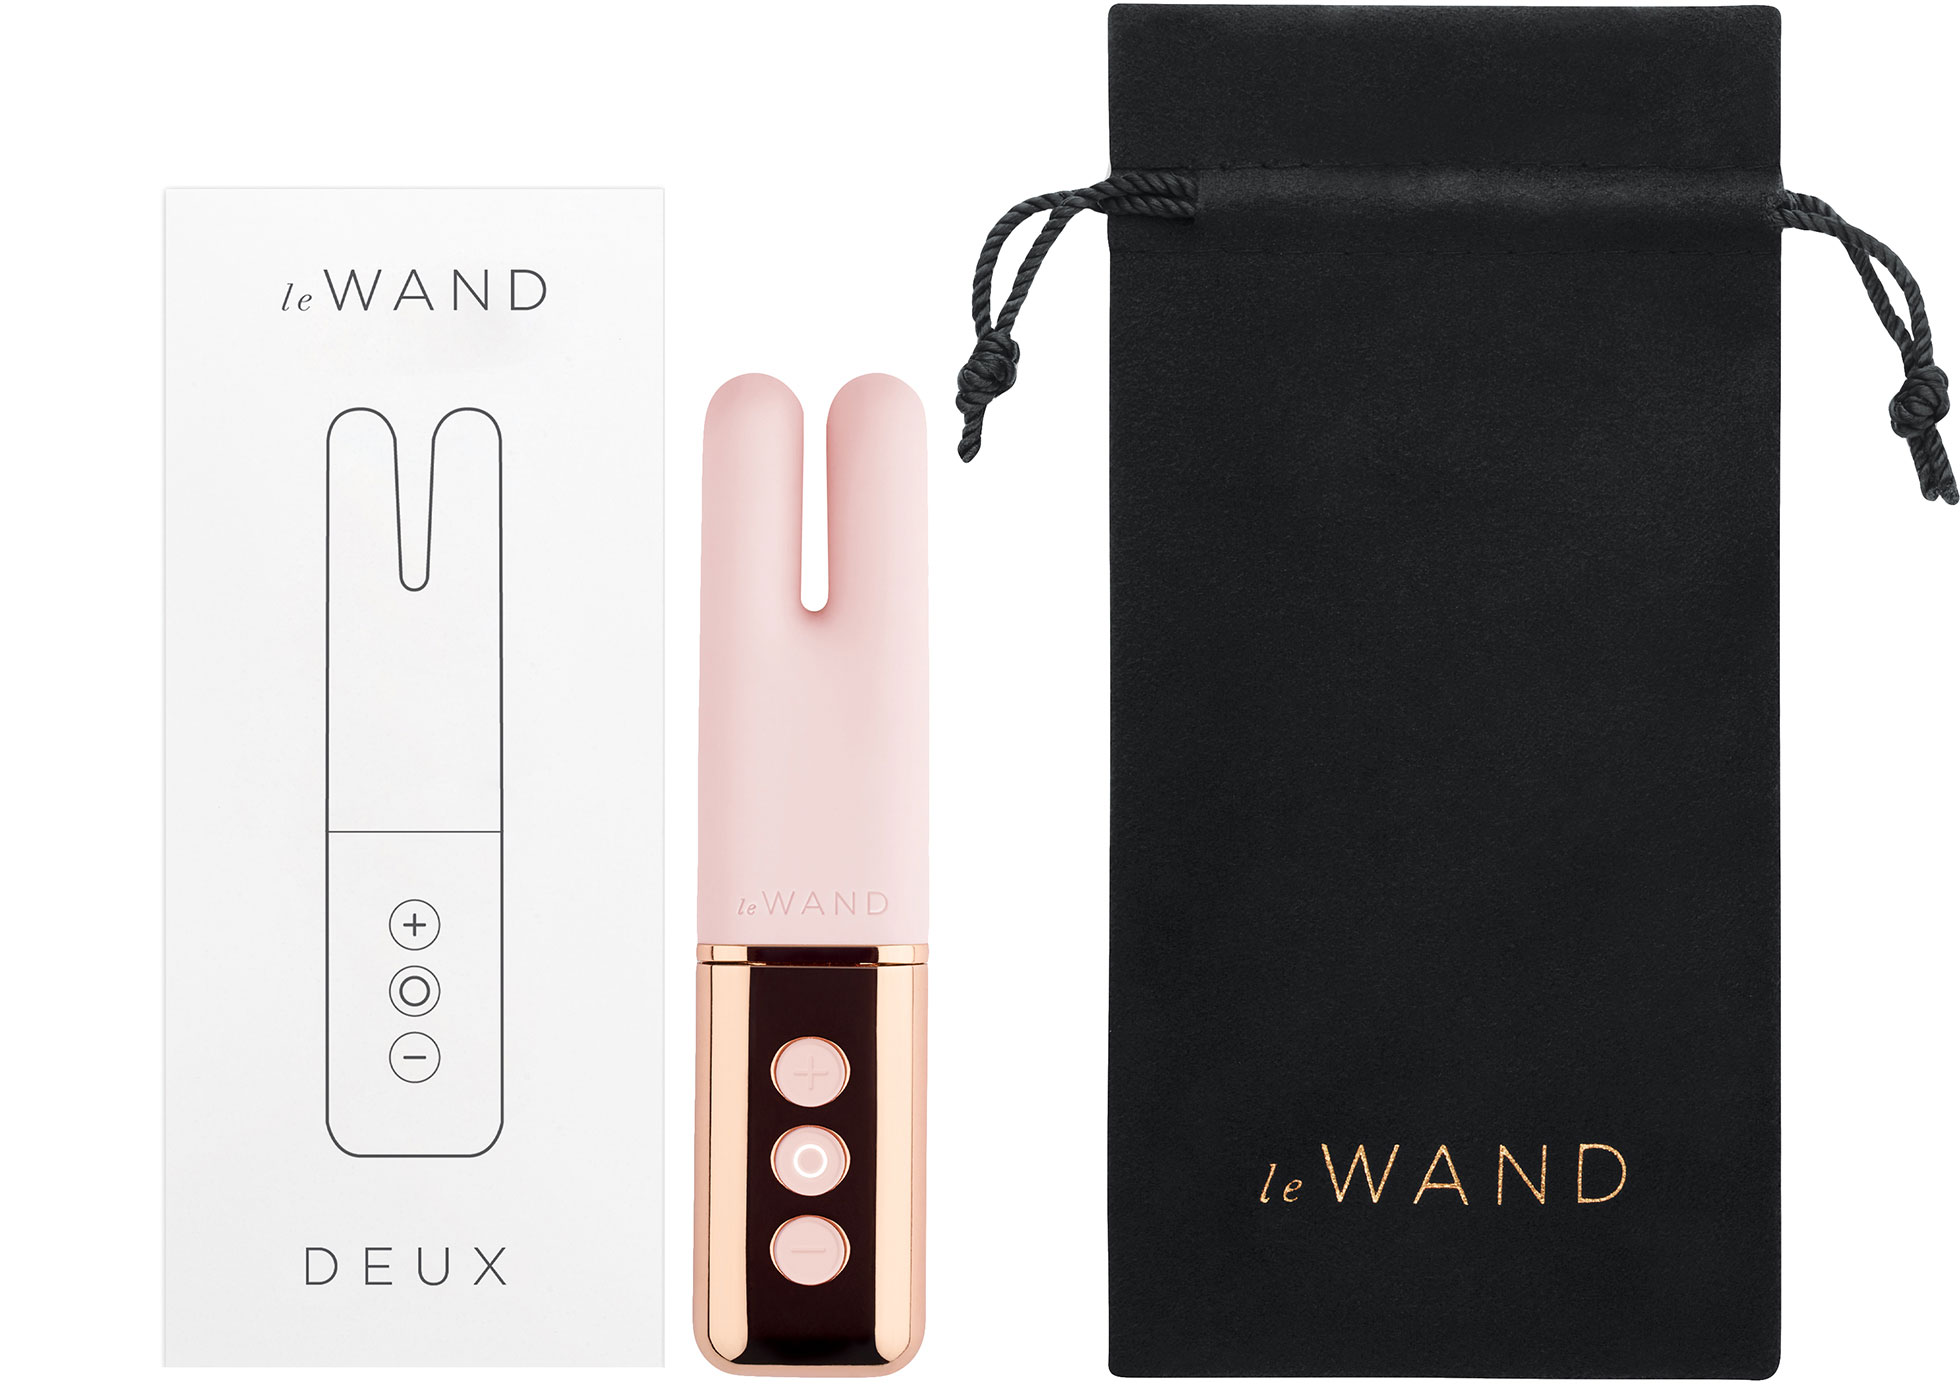 Le Wand Deux Powerful Twin-Motor Waterproof Rechargeable Vibrator - Box Contents